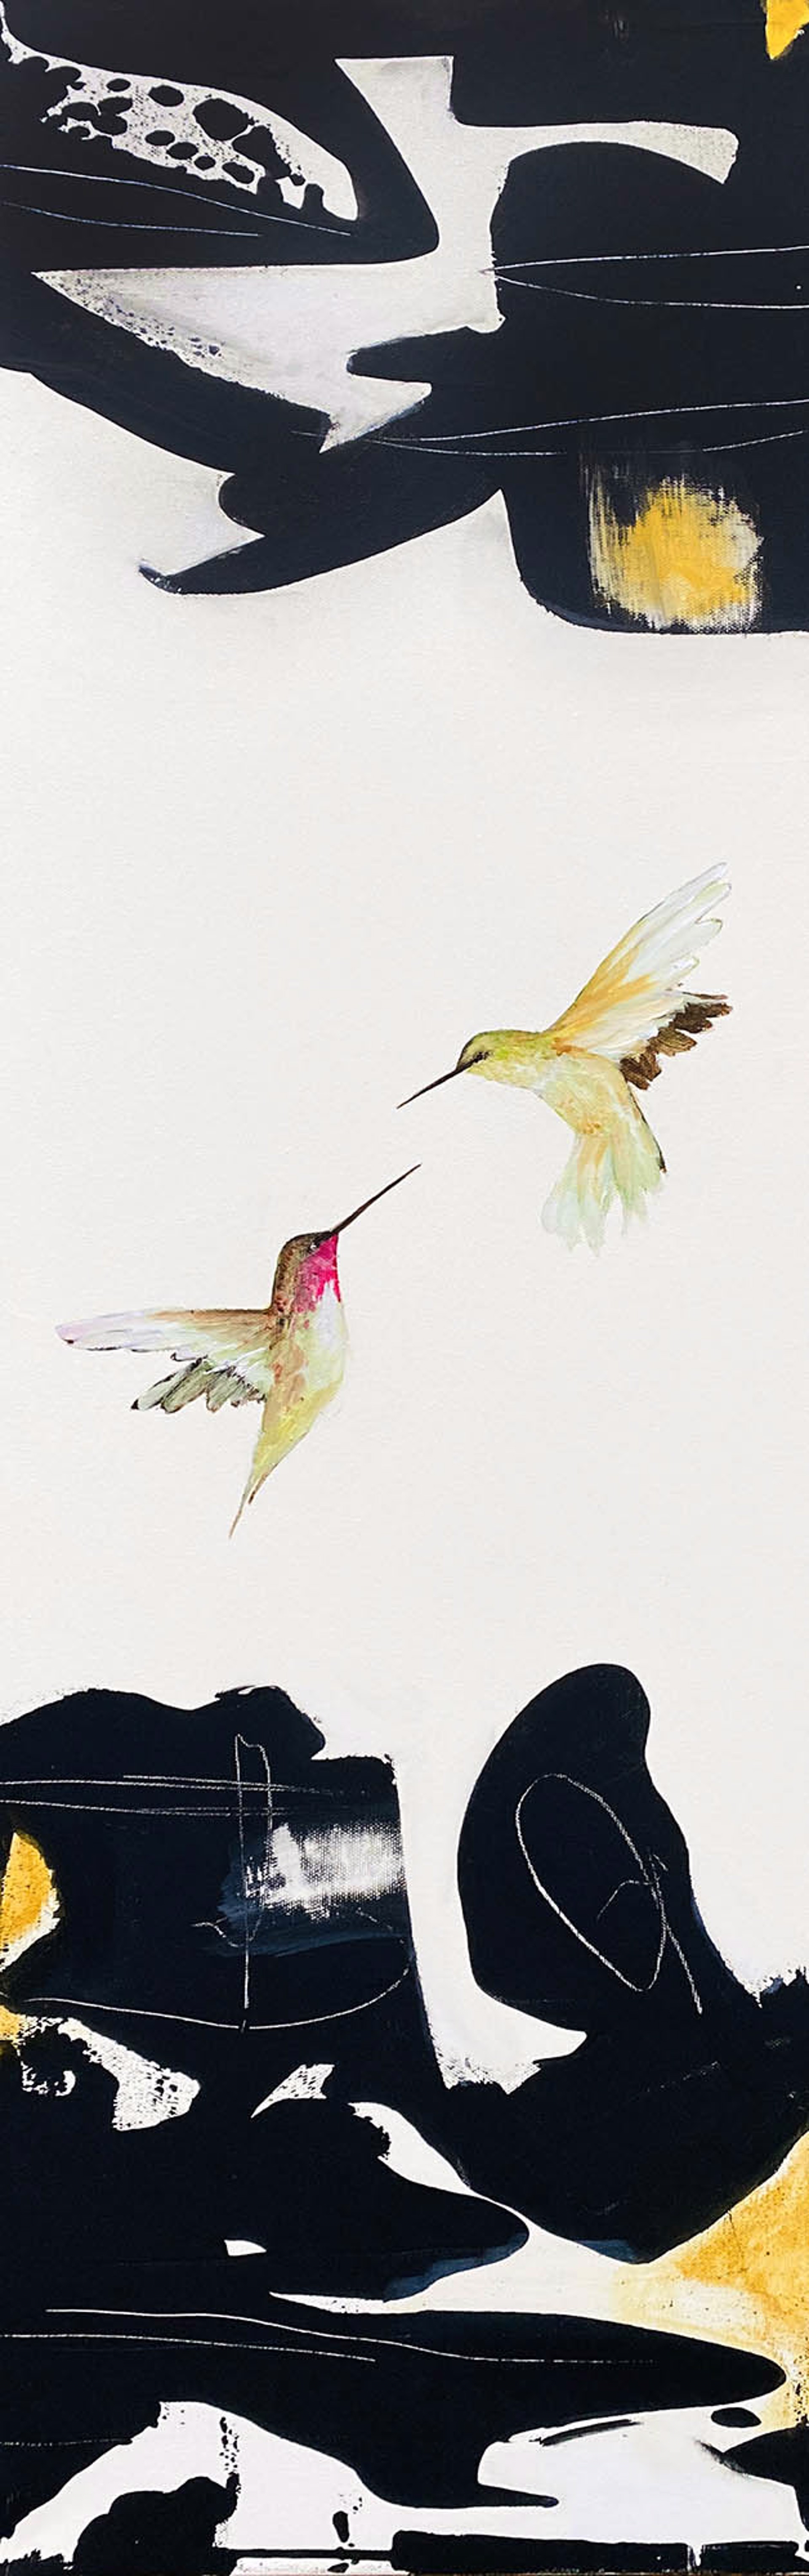 Original Oil Painting Featuring Two Hummingbirds In Flight Over Abstract Black And White Background